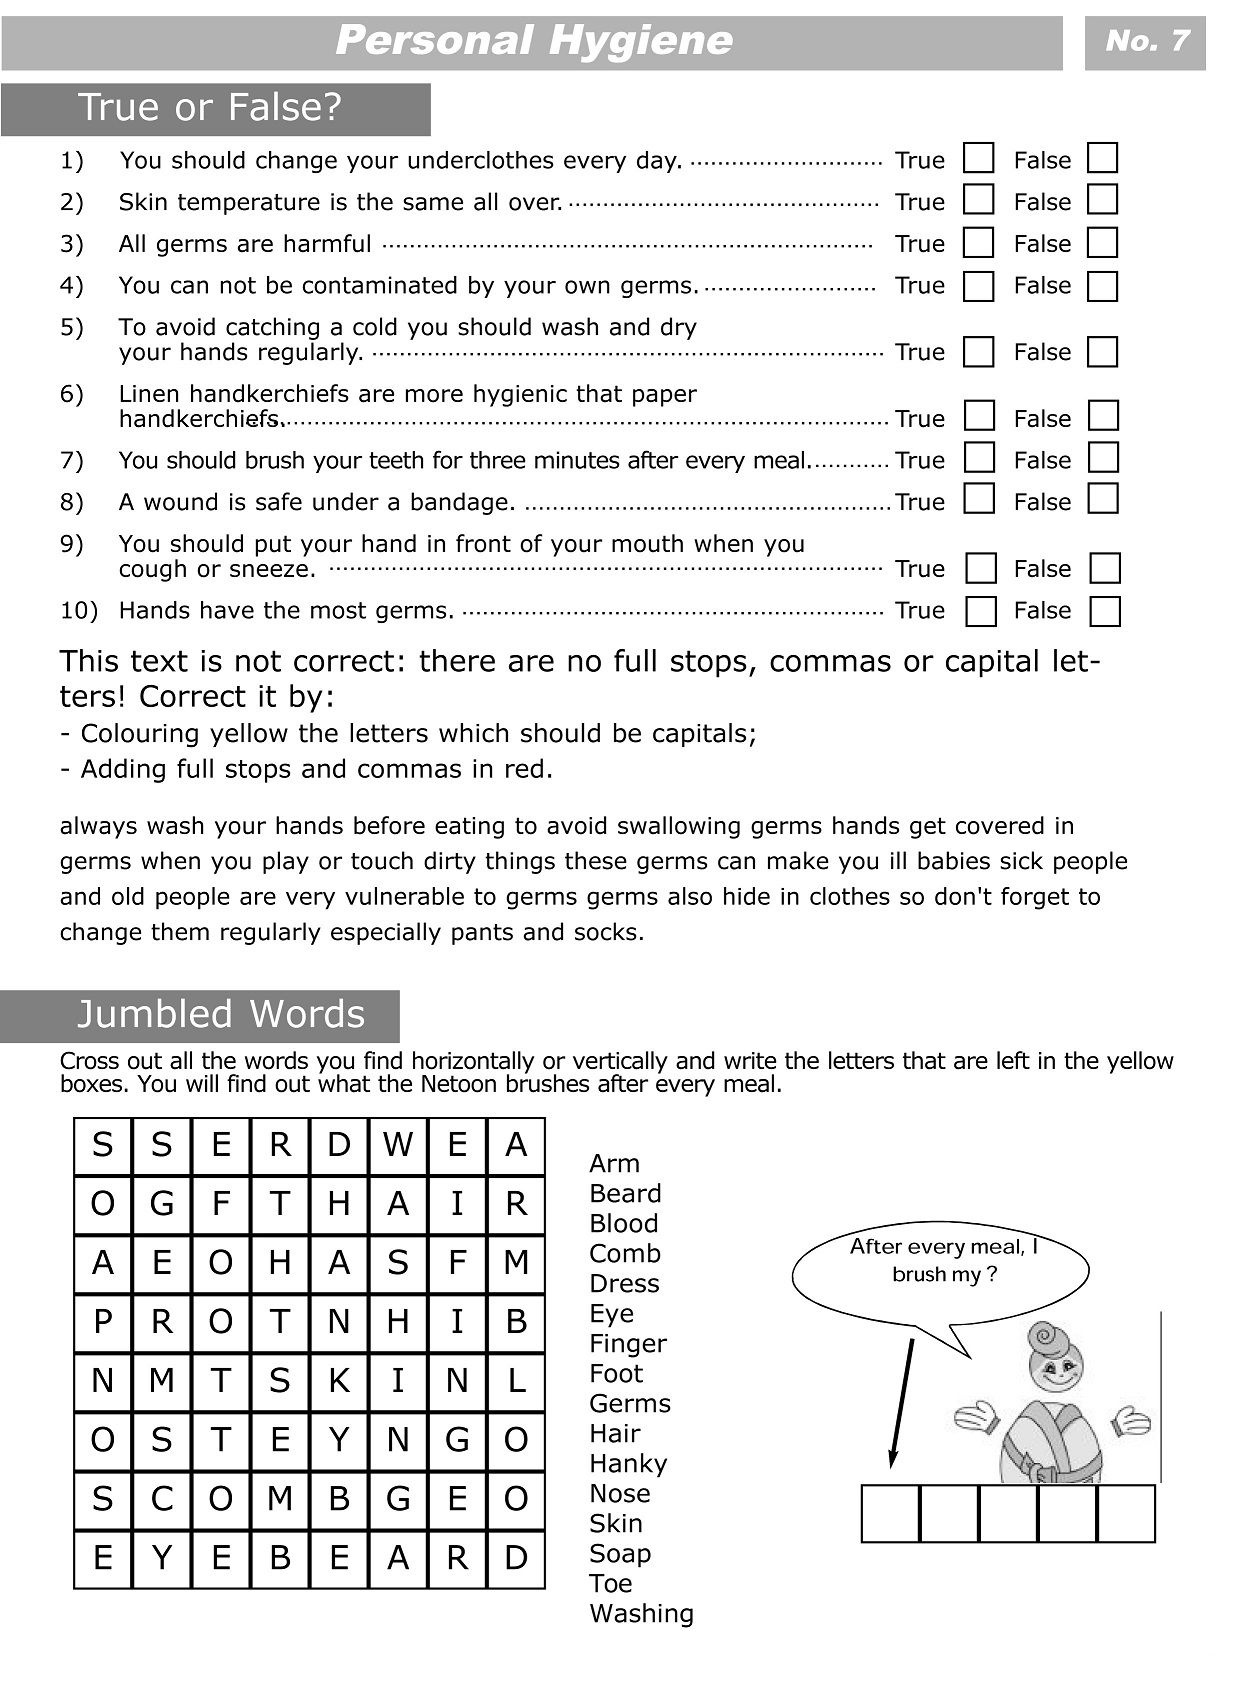 Printable Worksheets For Personal Hygiene | Personal Hygiene - Free Printable Personal Hygiene Worksheets